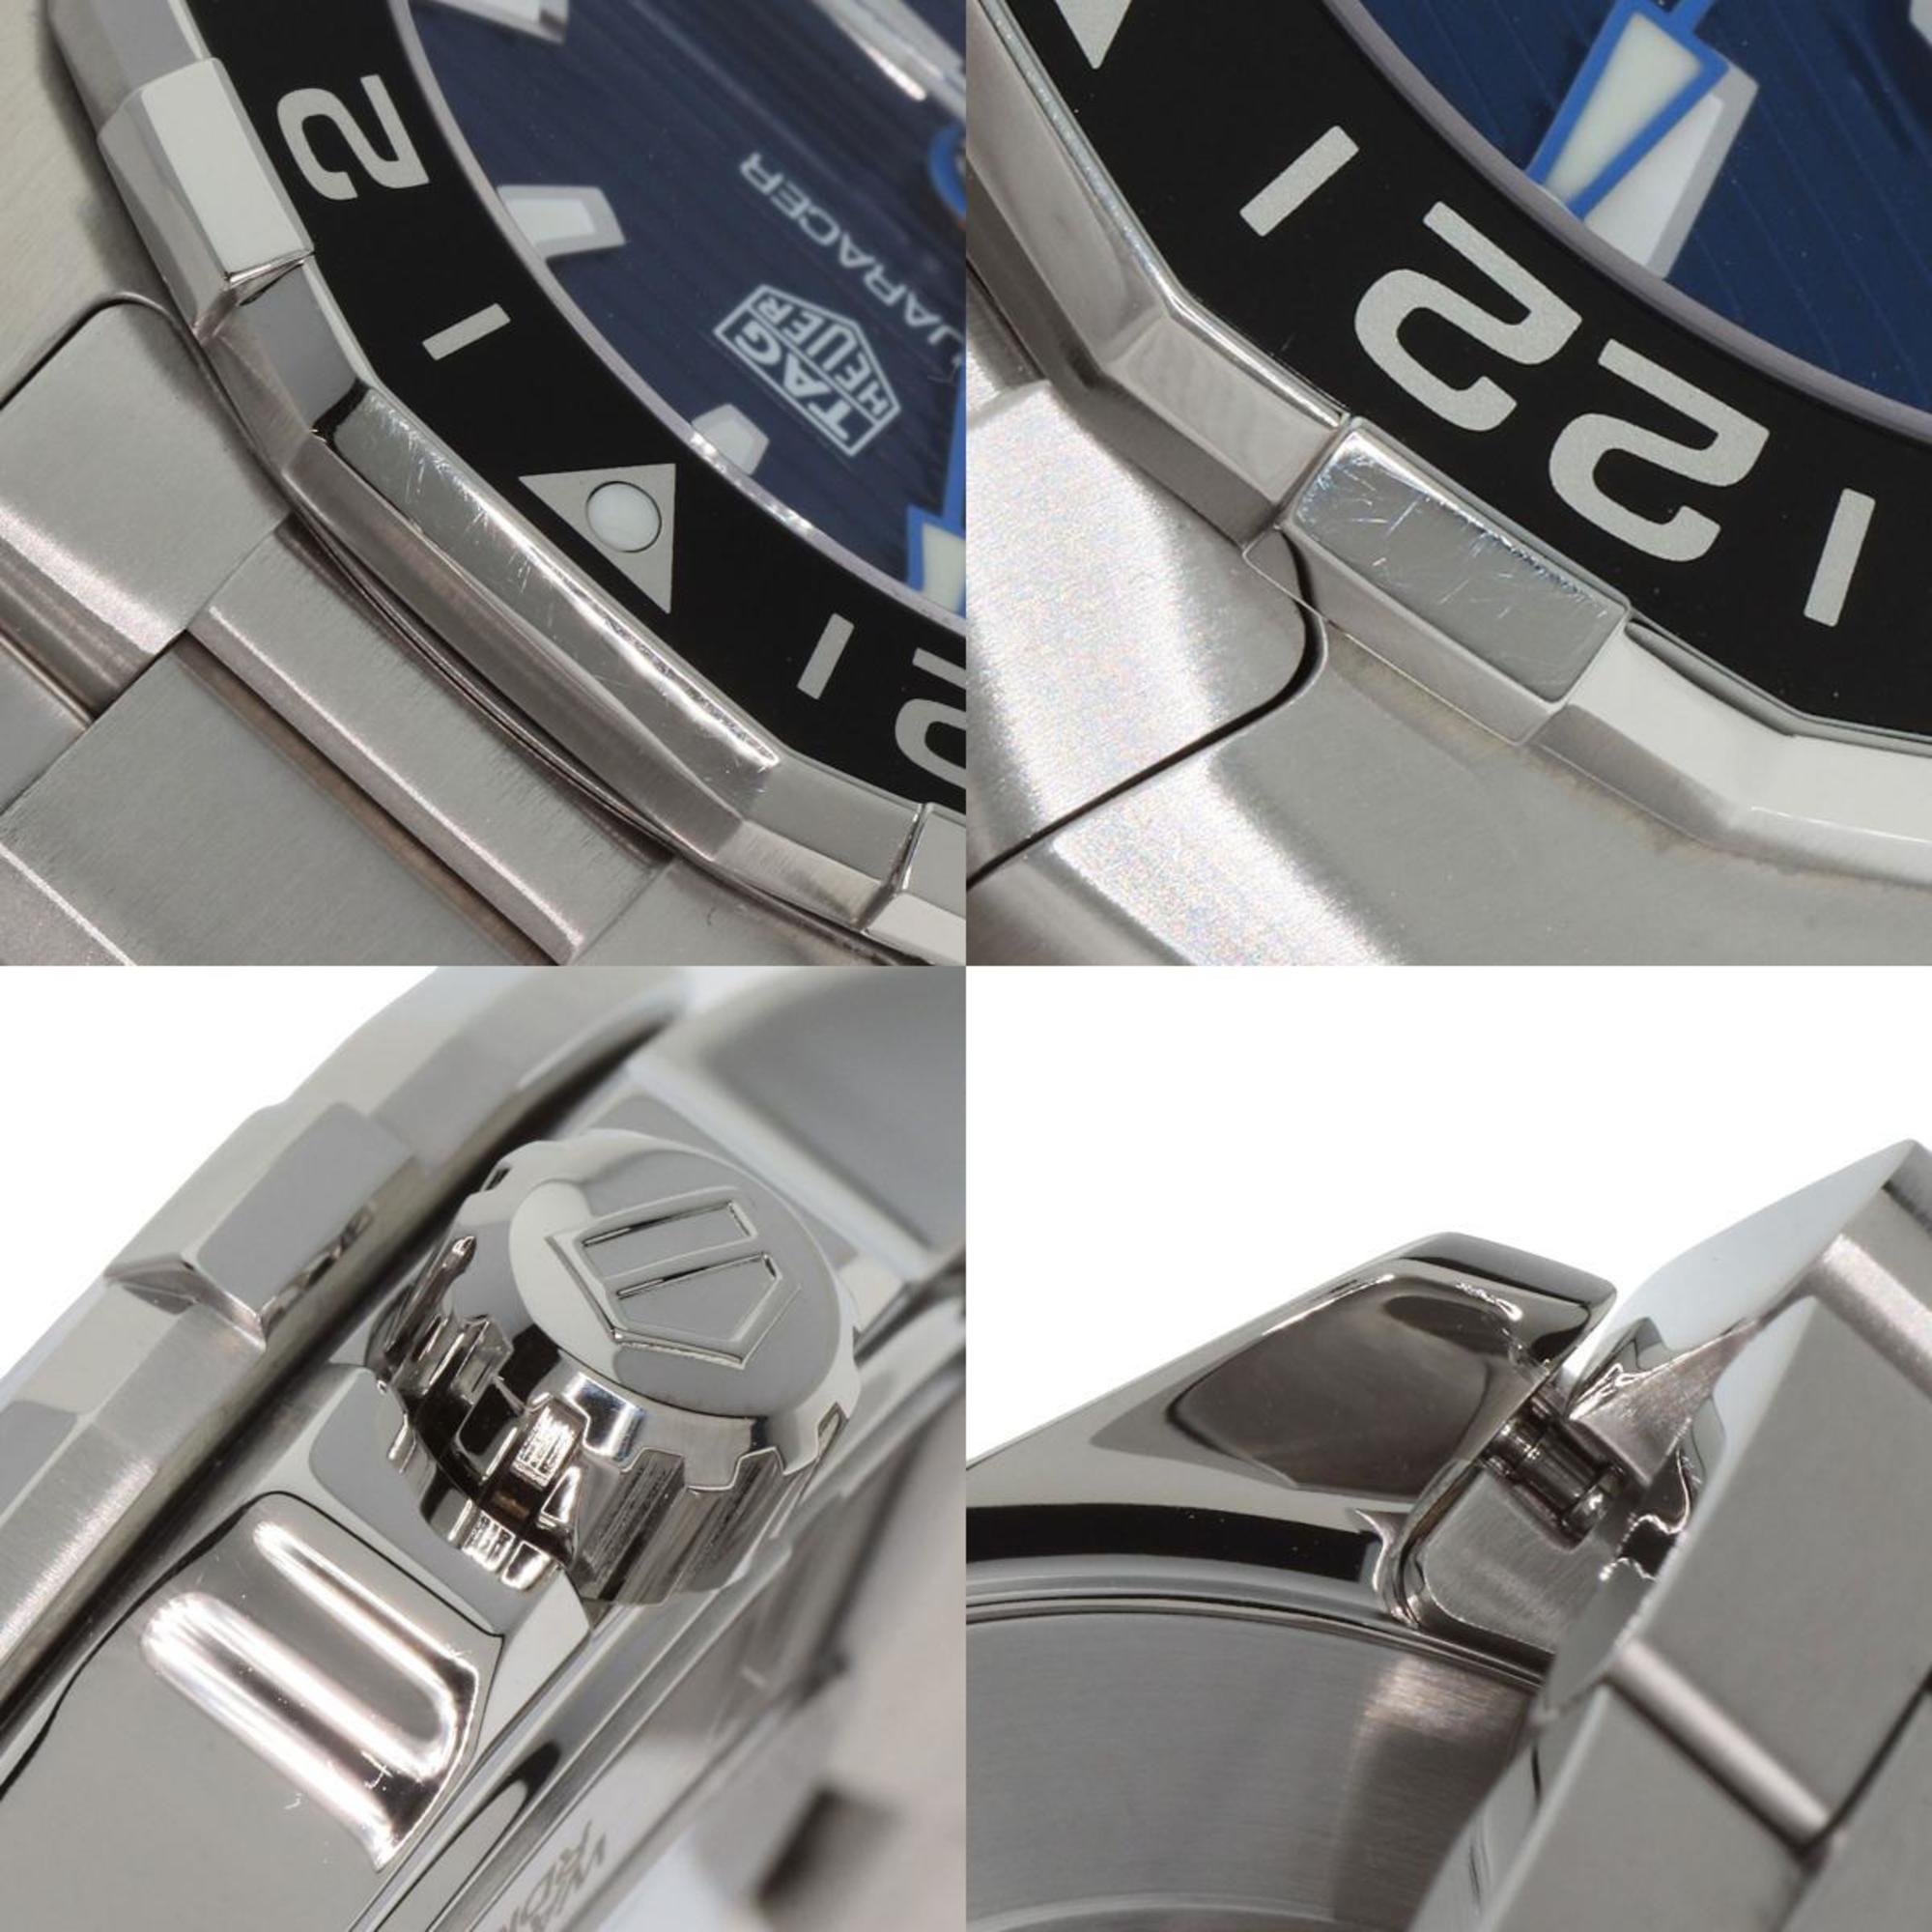 TAG Heuer WAY201T-0 Aquaracer Calibre 7 Watch Stainless Steel SS Men's